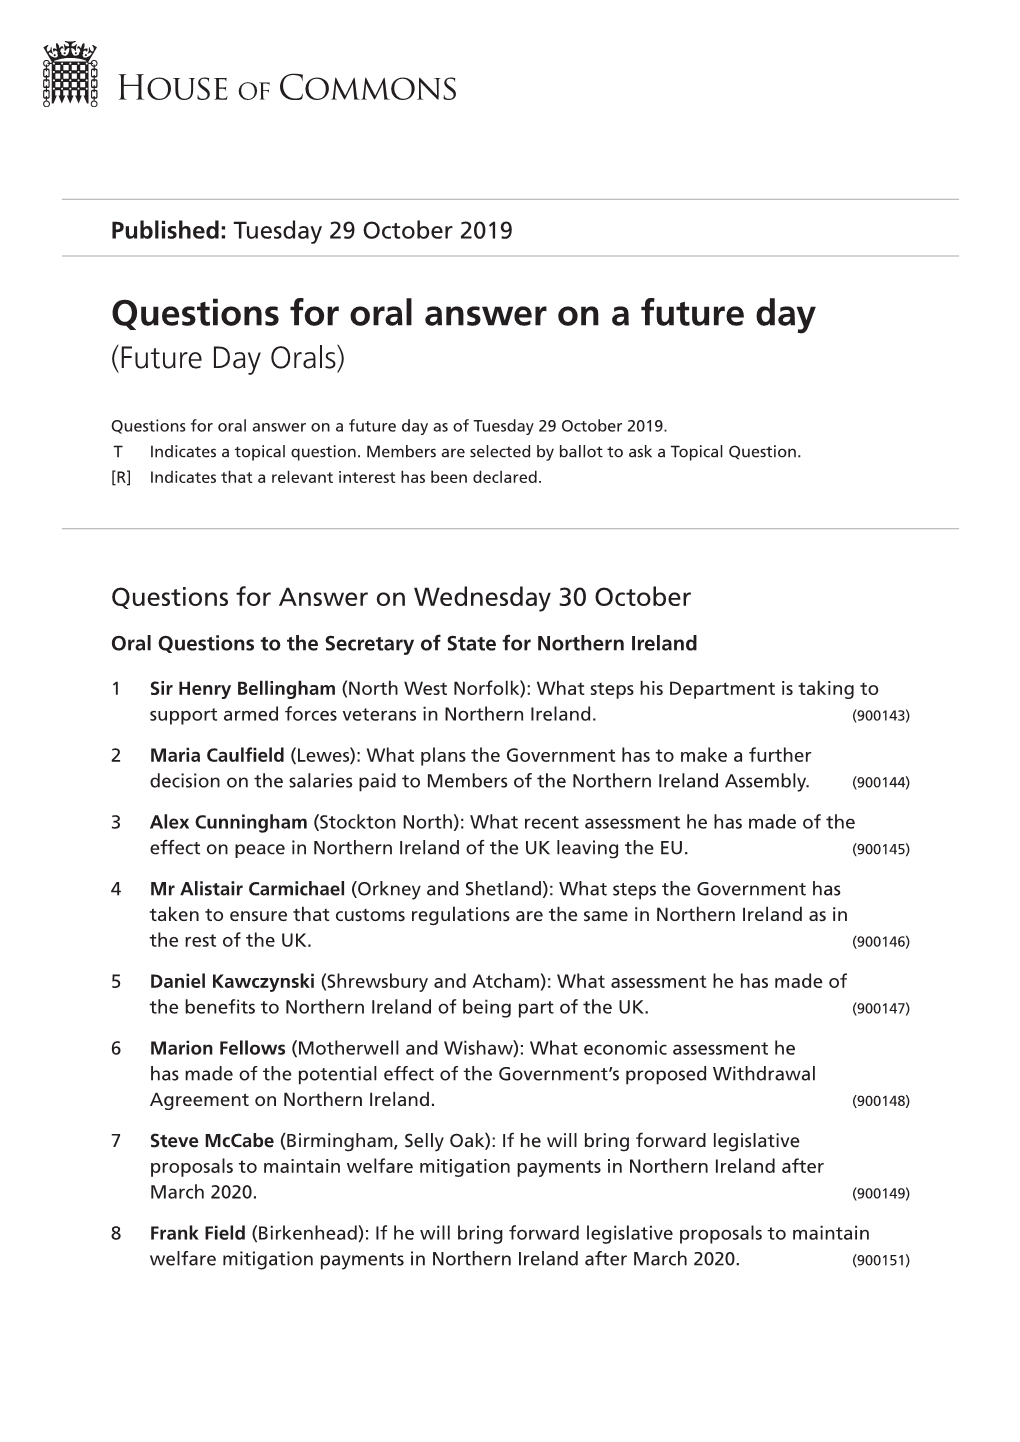 Future Oral Questions As of Tue 29 Oct 2019